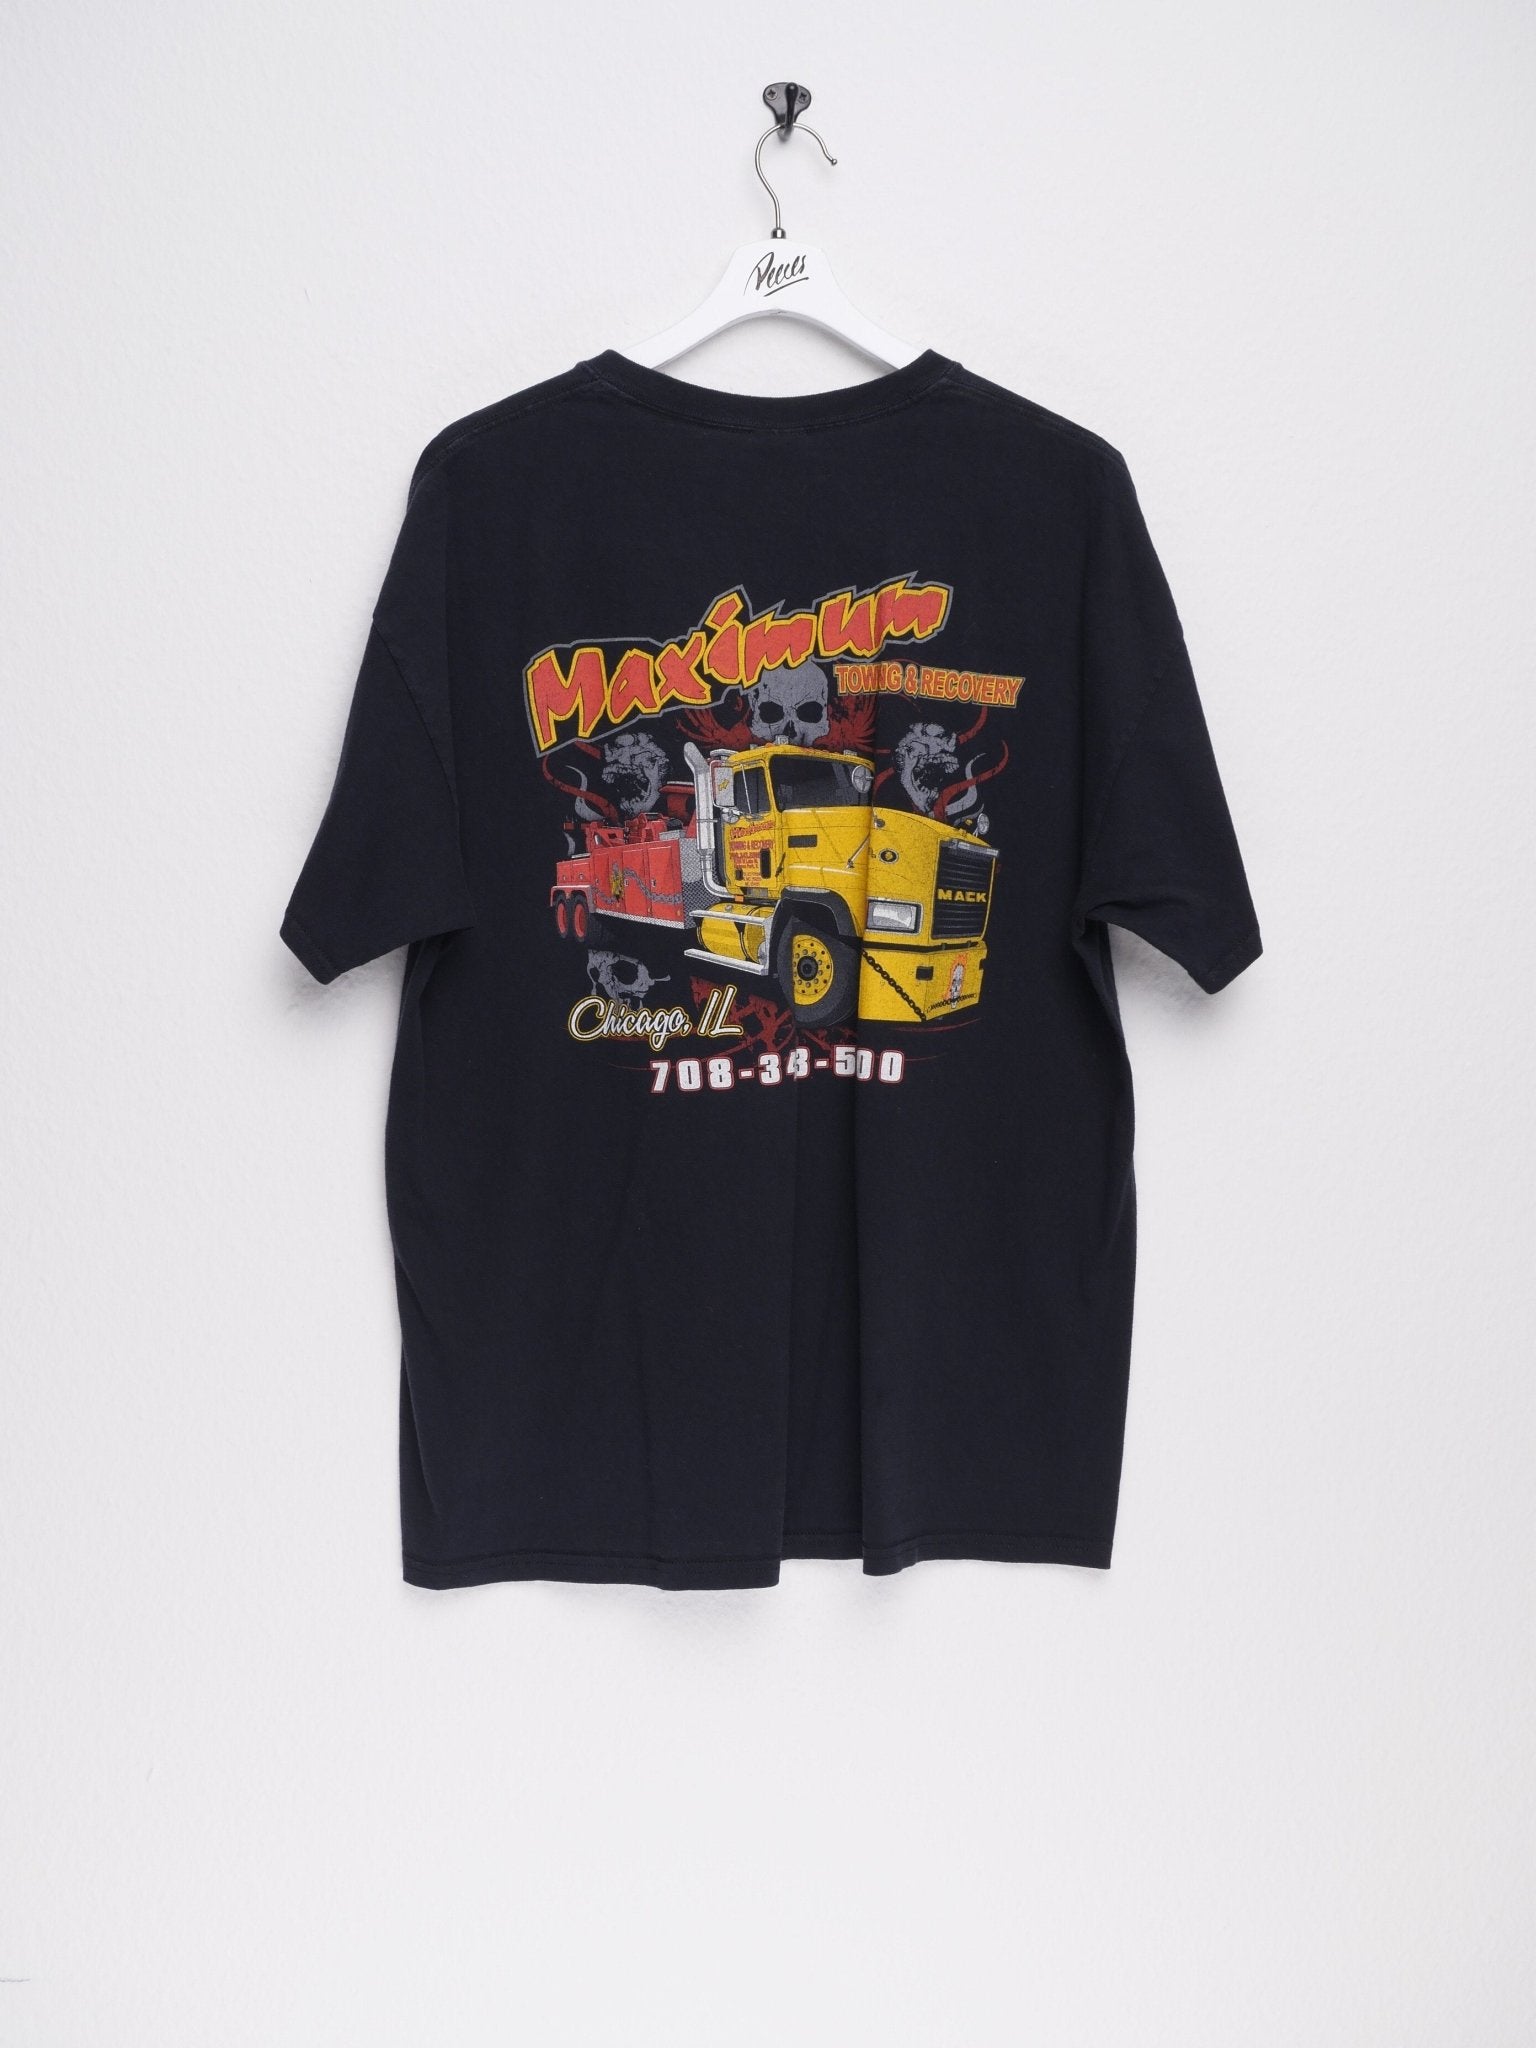 'Maximum Towing & Recovery' printed Graphic black Shirt - Peeces